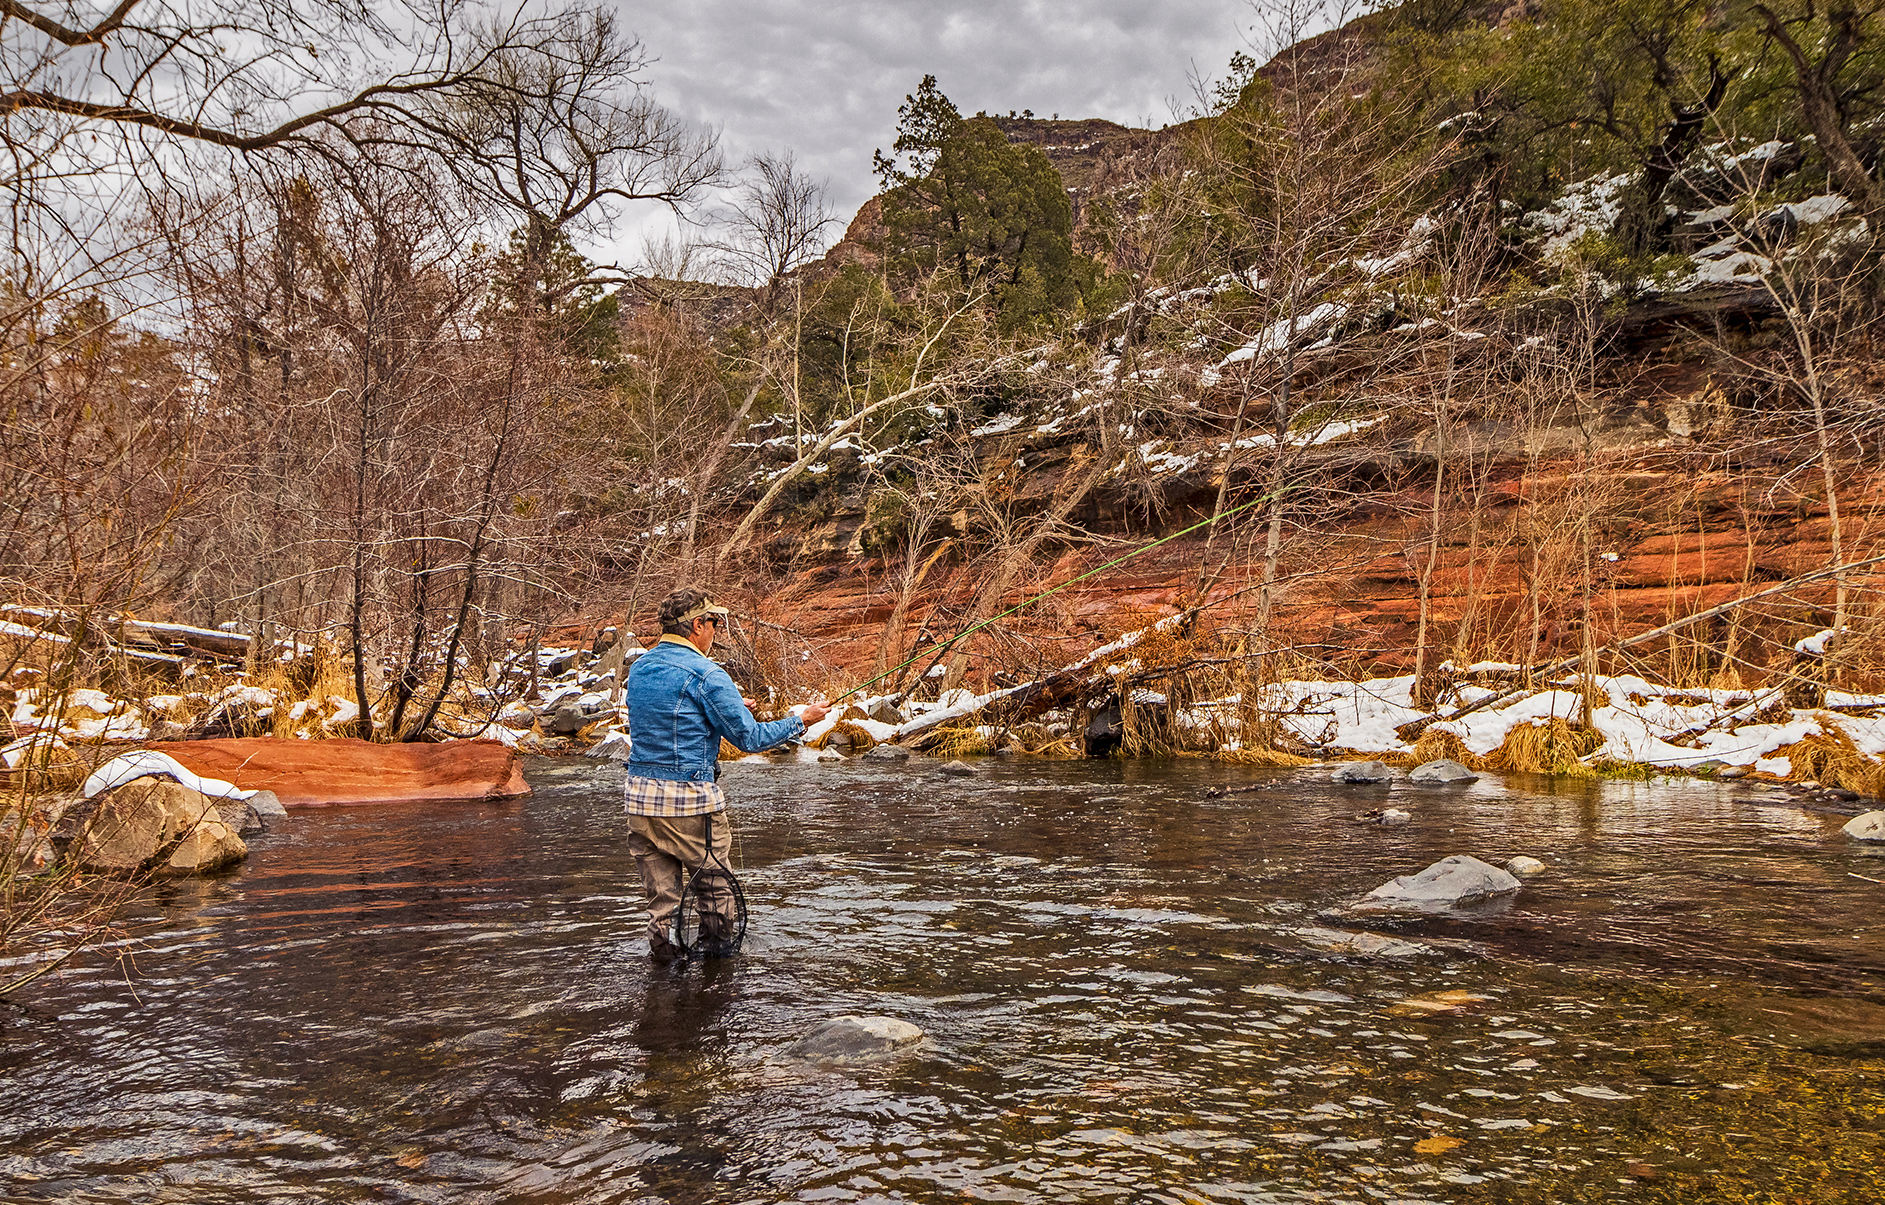 Game & Fish discontinues community fishing licenses - Sedona Red